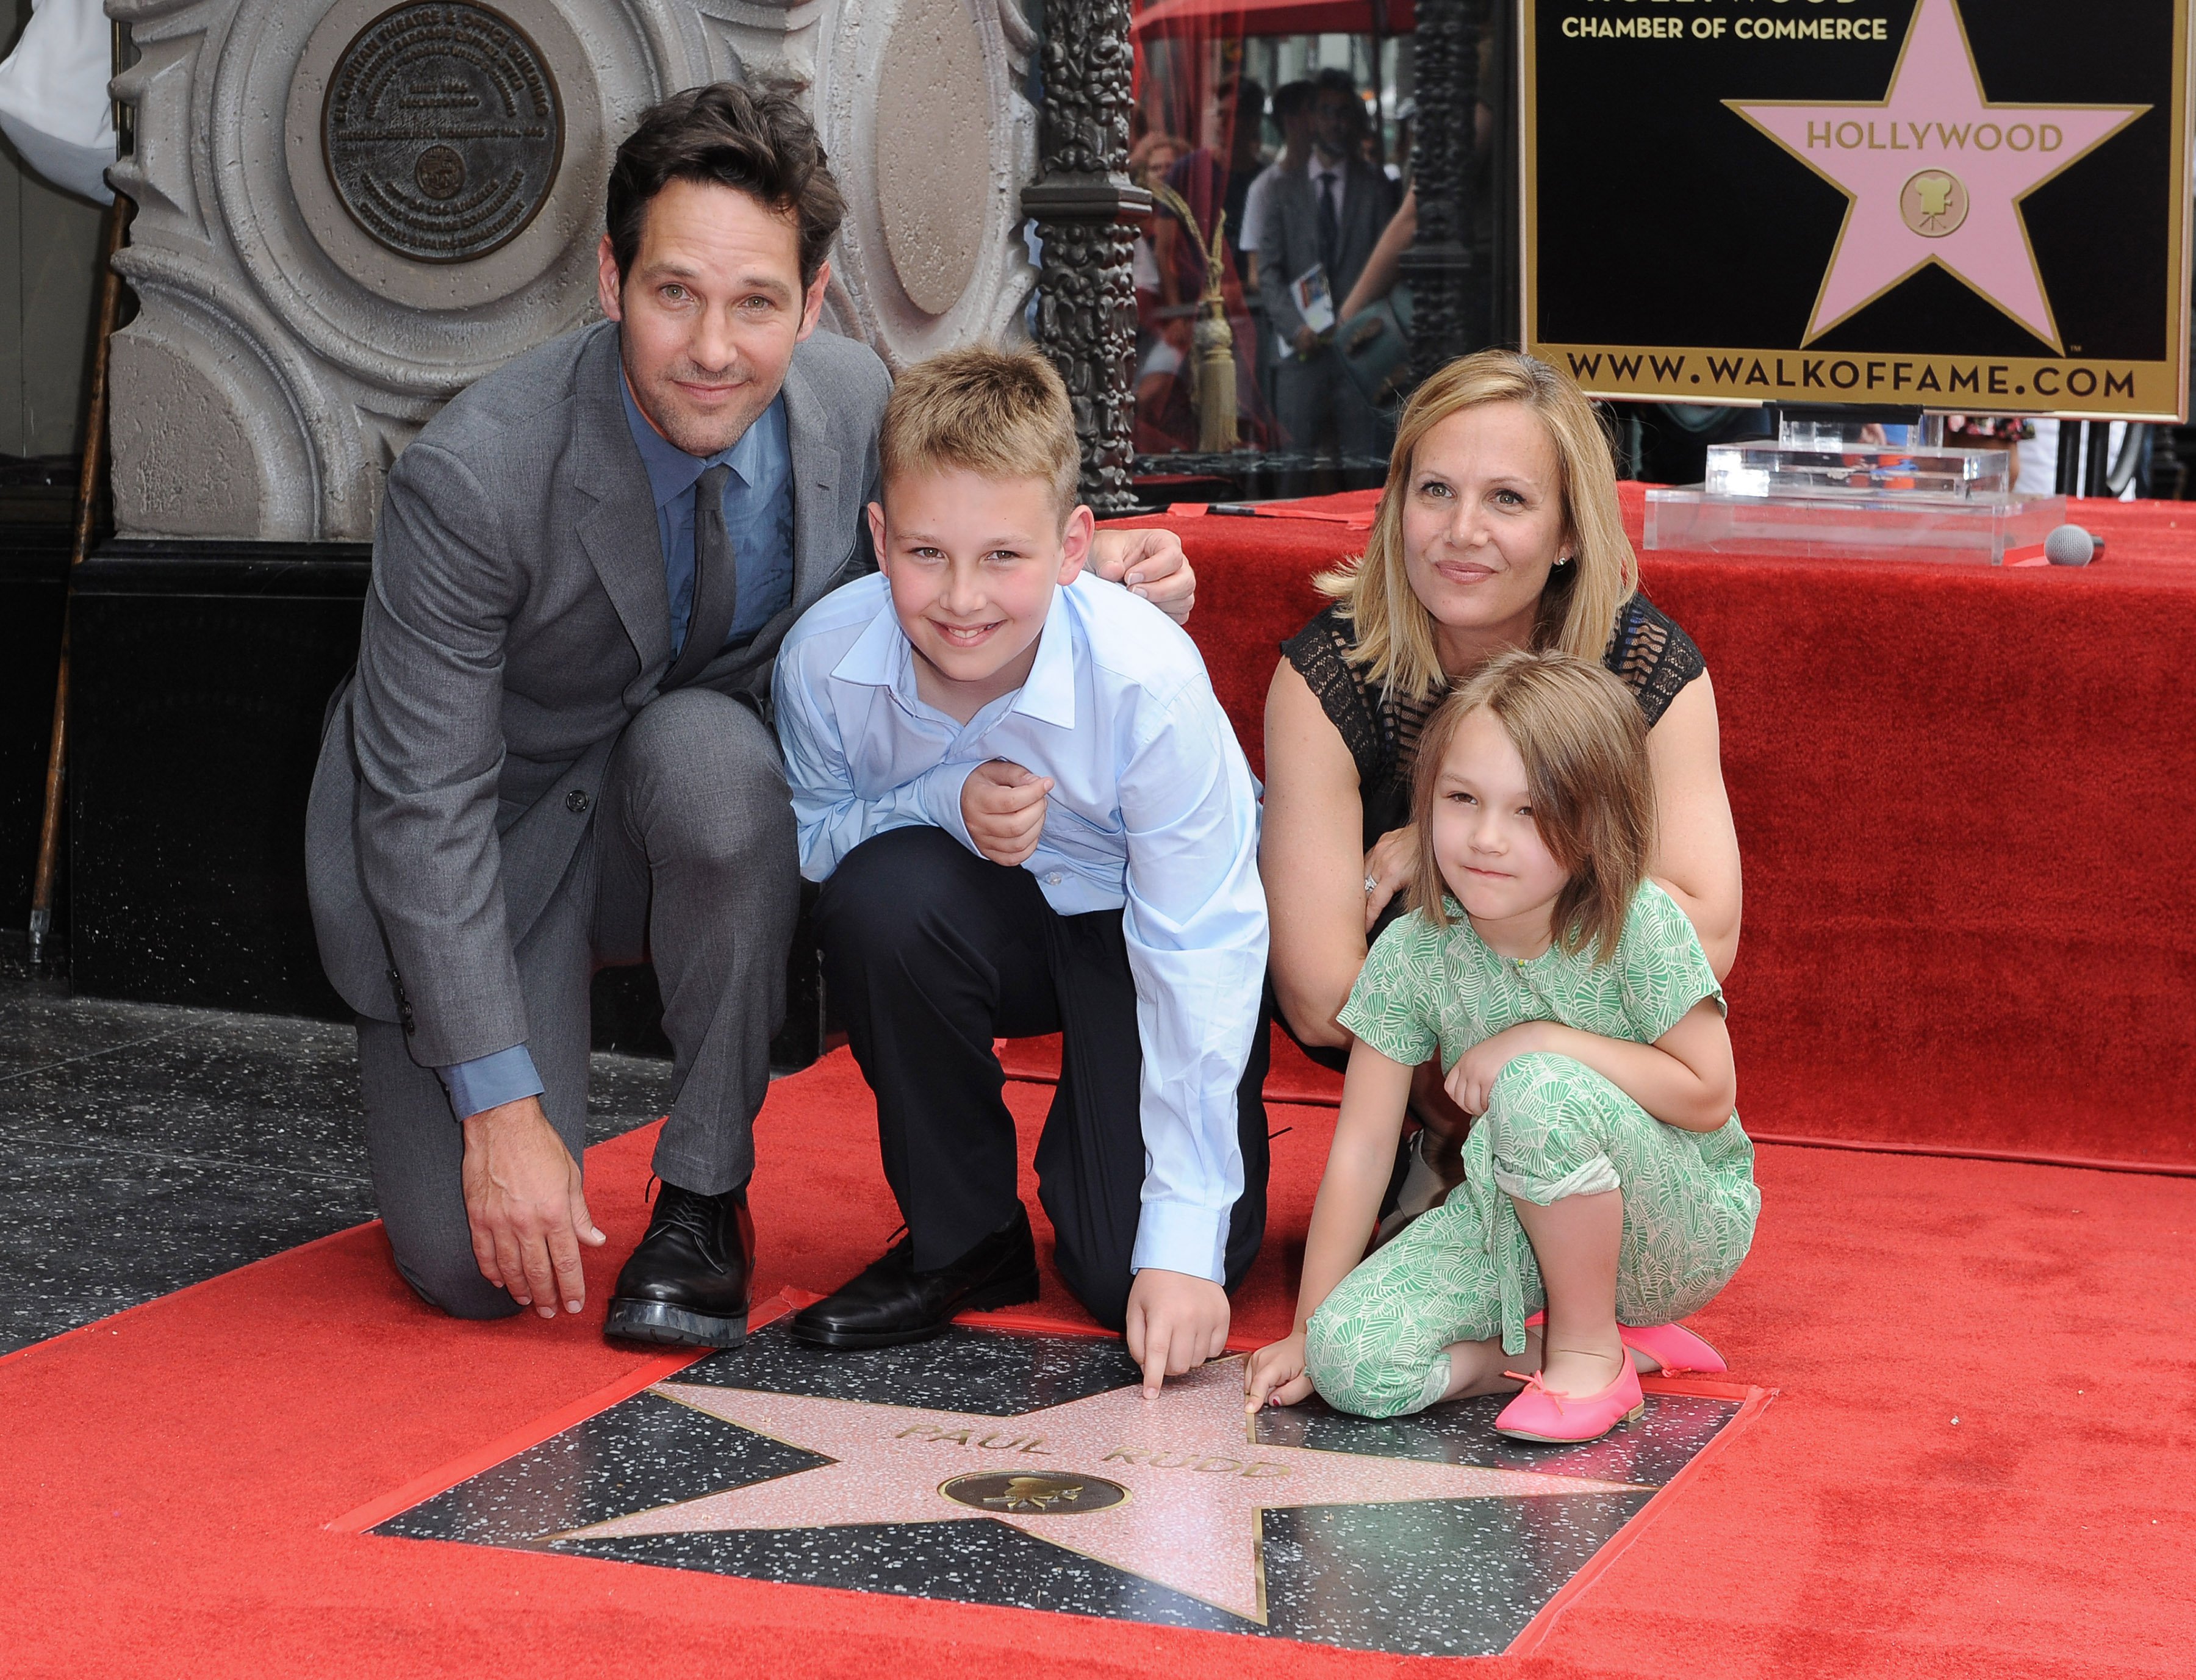 Paul Rudd, wife Julie Yaeger, son Jack Rudd and daughter Darby Rudd on the Hollywood Walk of Fame on July 1, 2015, in Hollywood, California. | Source: Getty Images